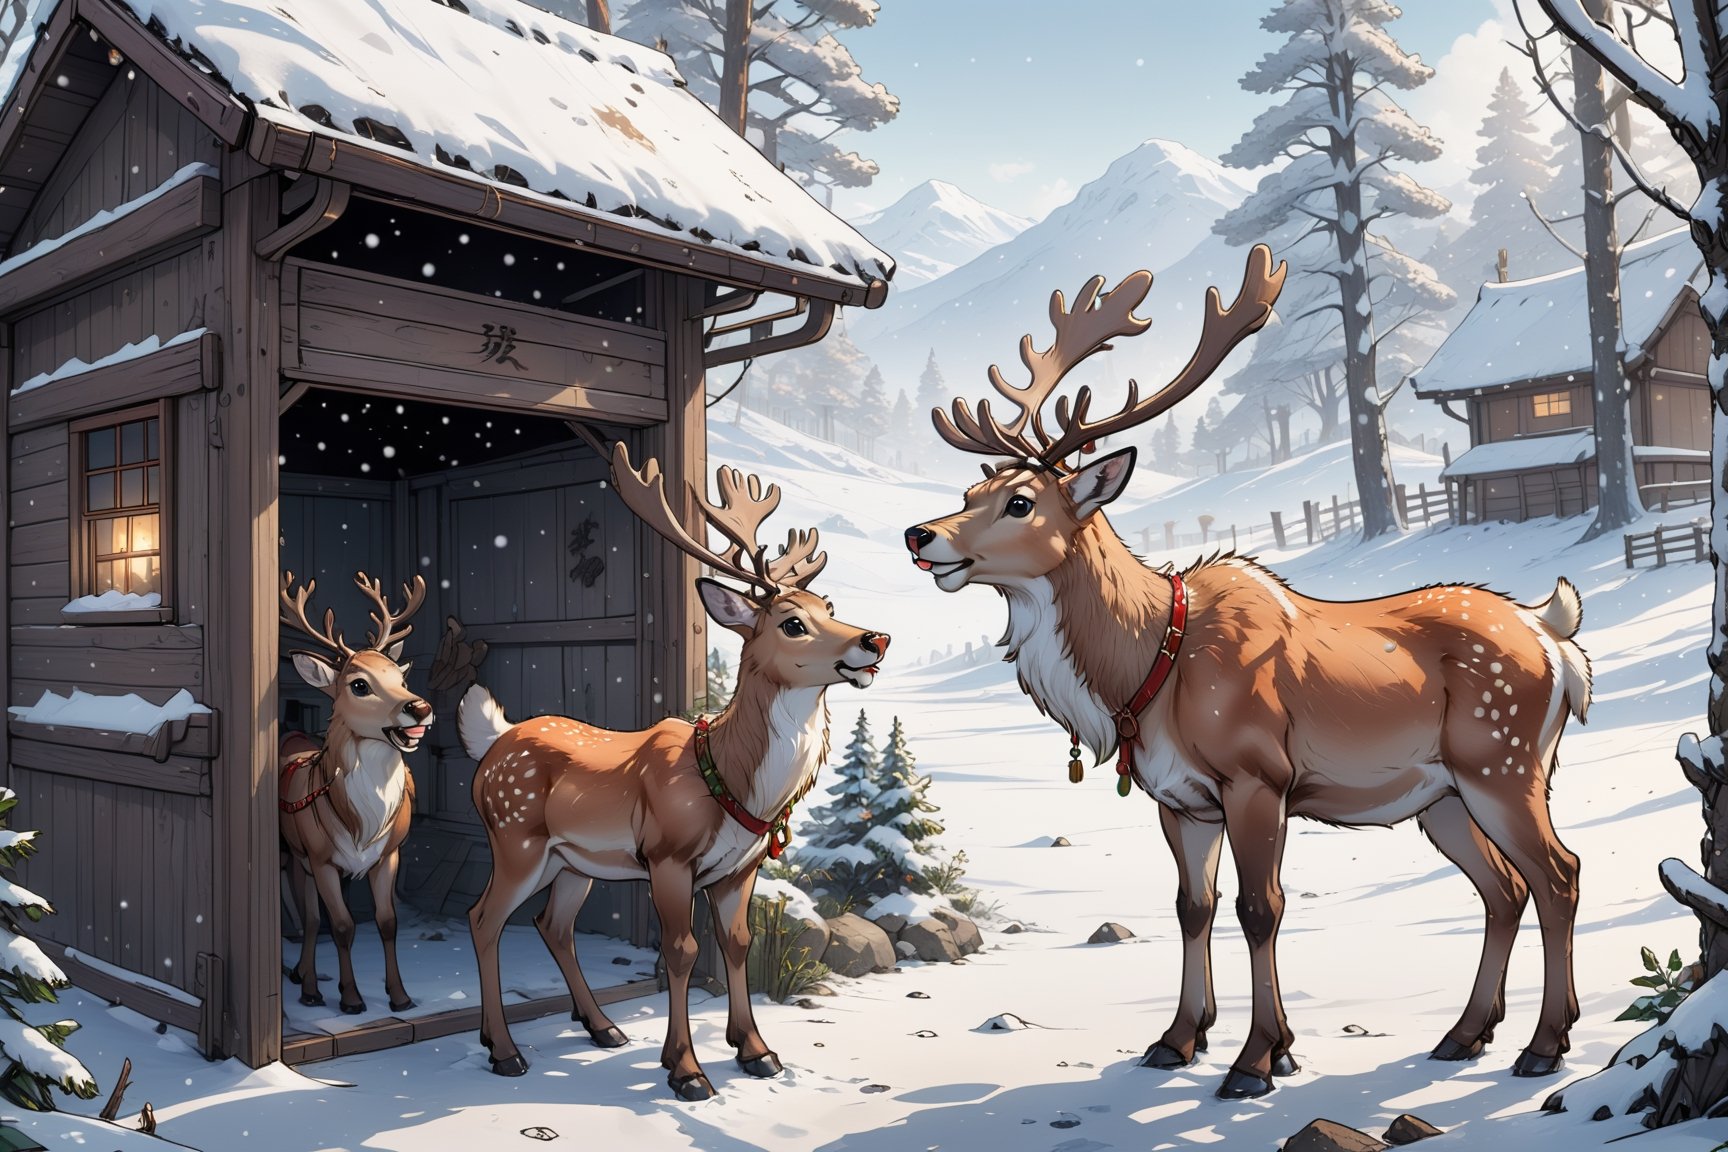 2D manga Masterpiece, In an enclosure, under the snow, two Santa's reindeer are chatting 